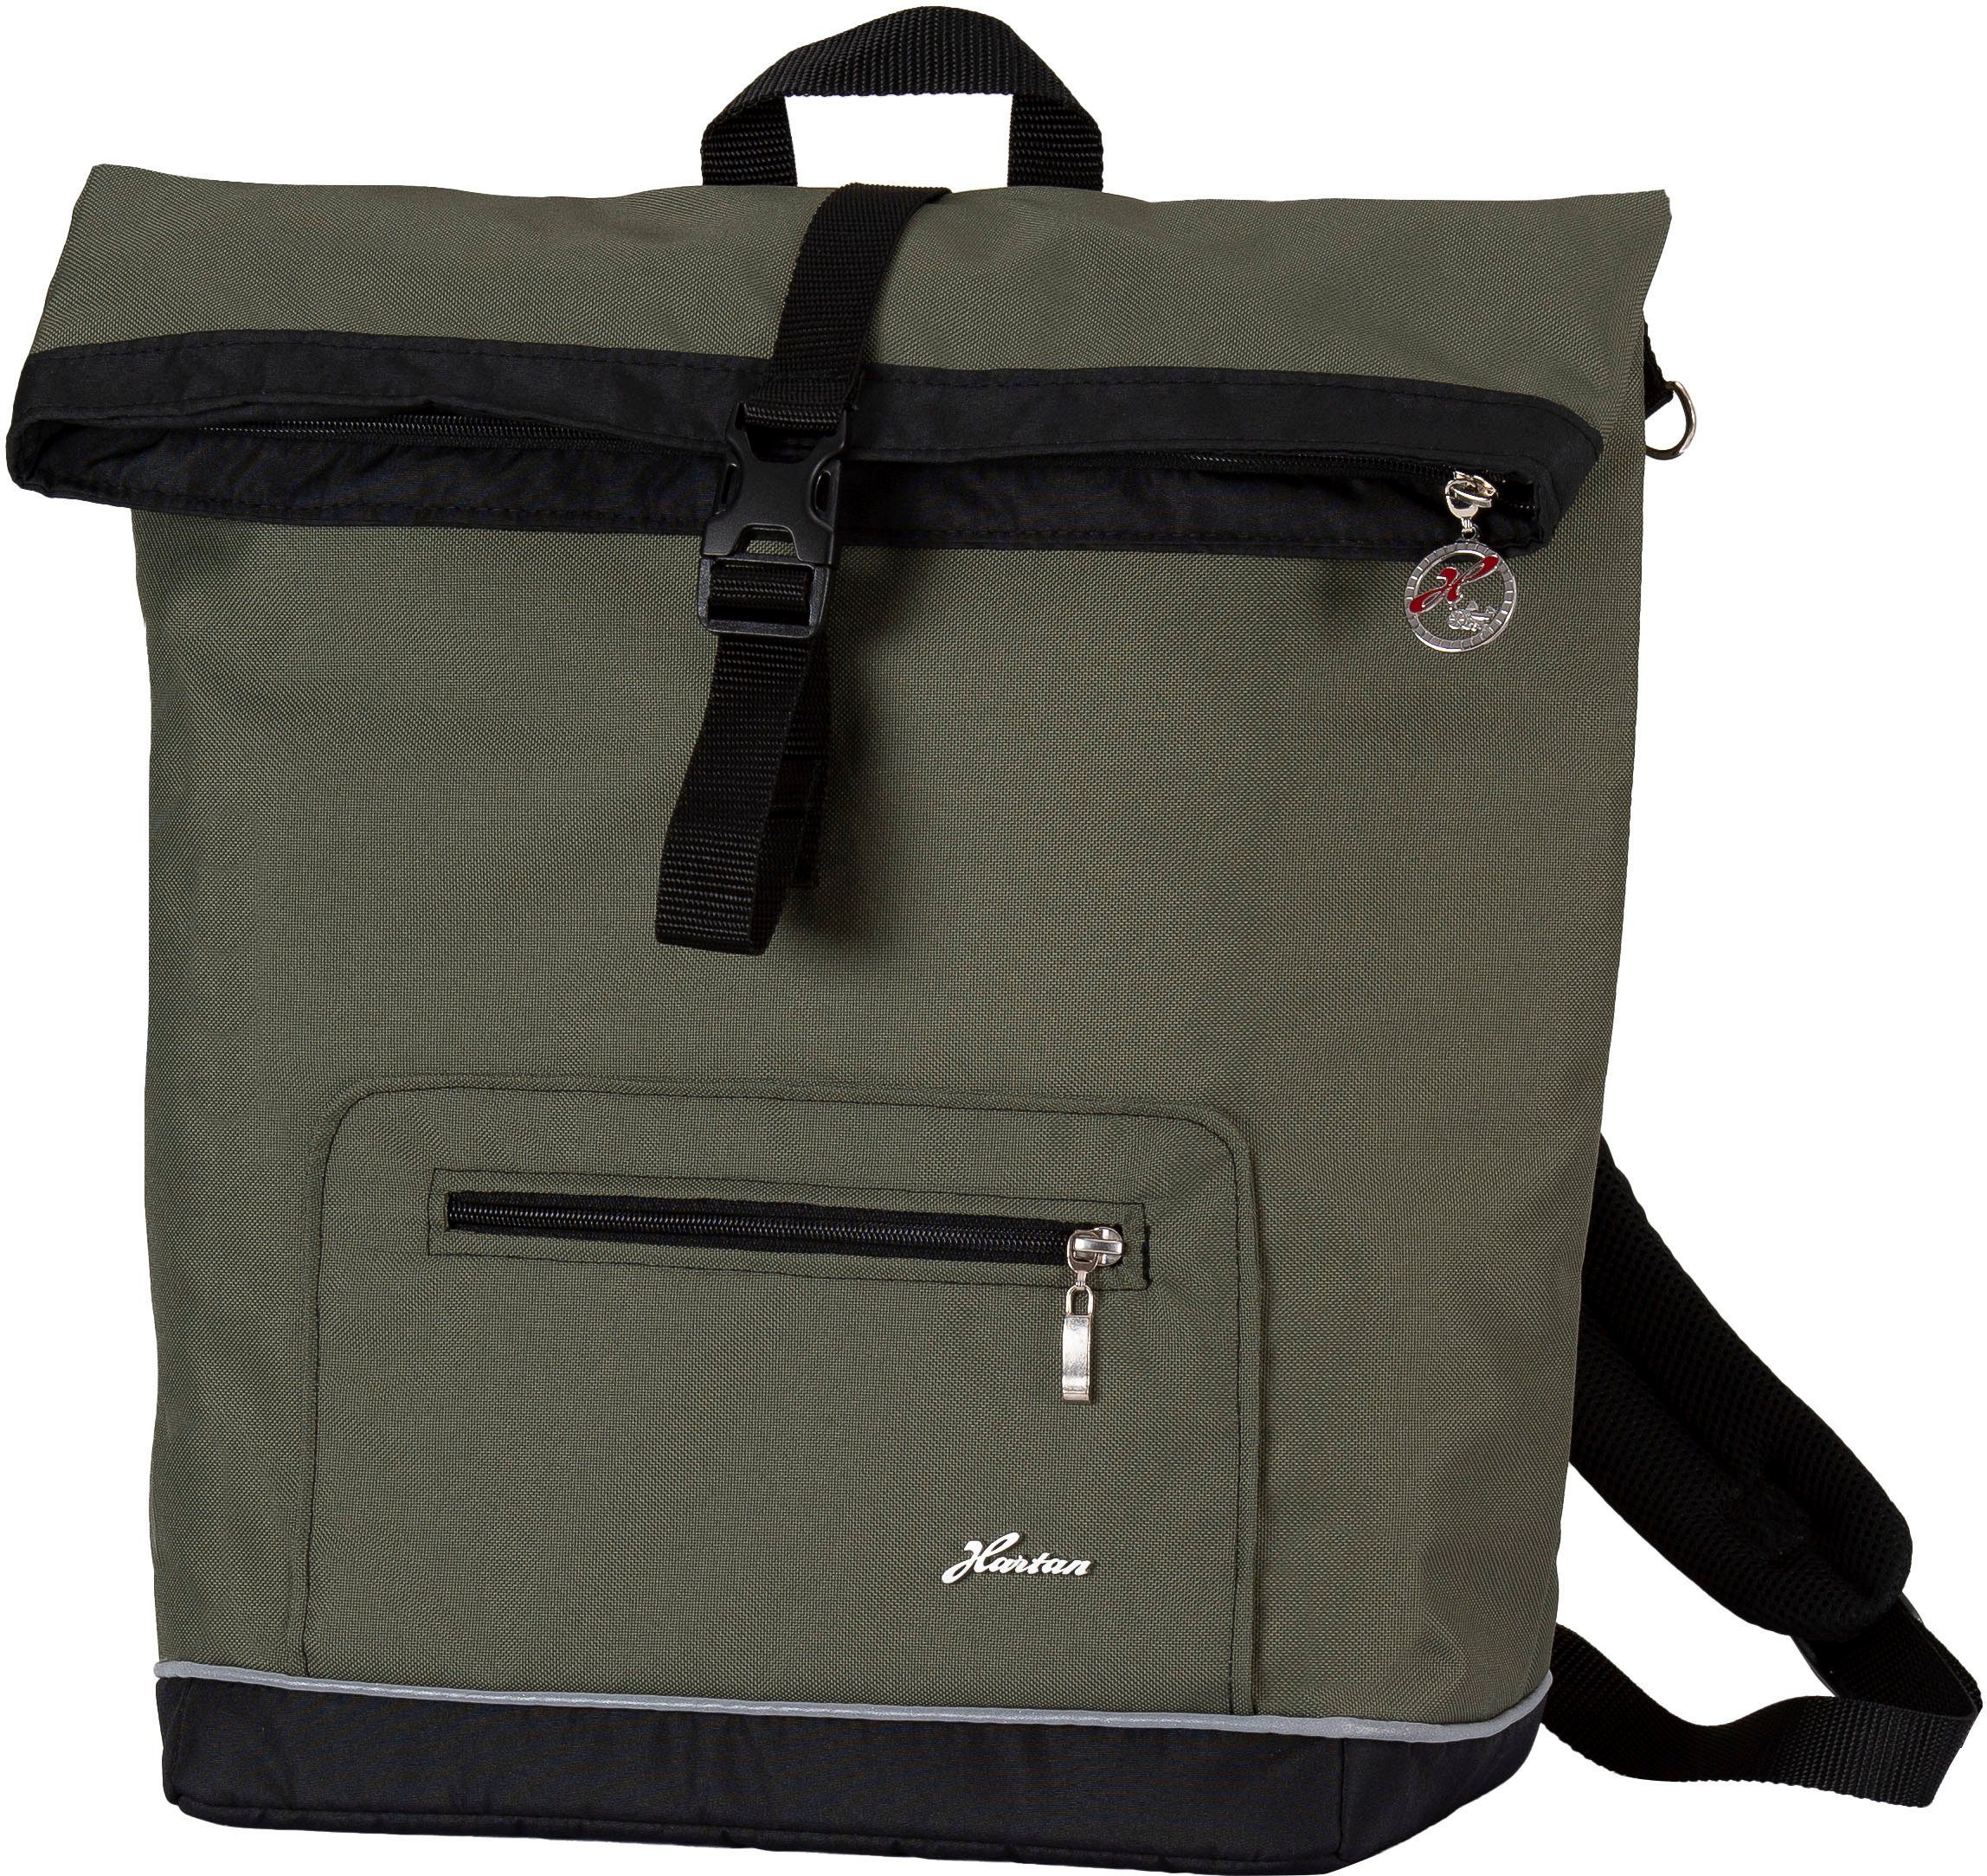 Hartan Wickelrucksack Space bag - Casual Collection, mit Thermofach; Made in Germany rainbow